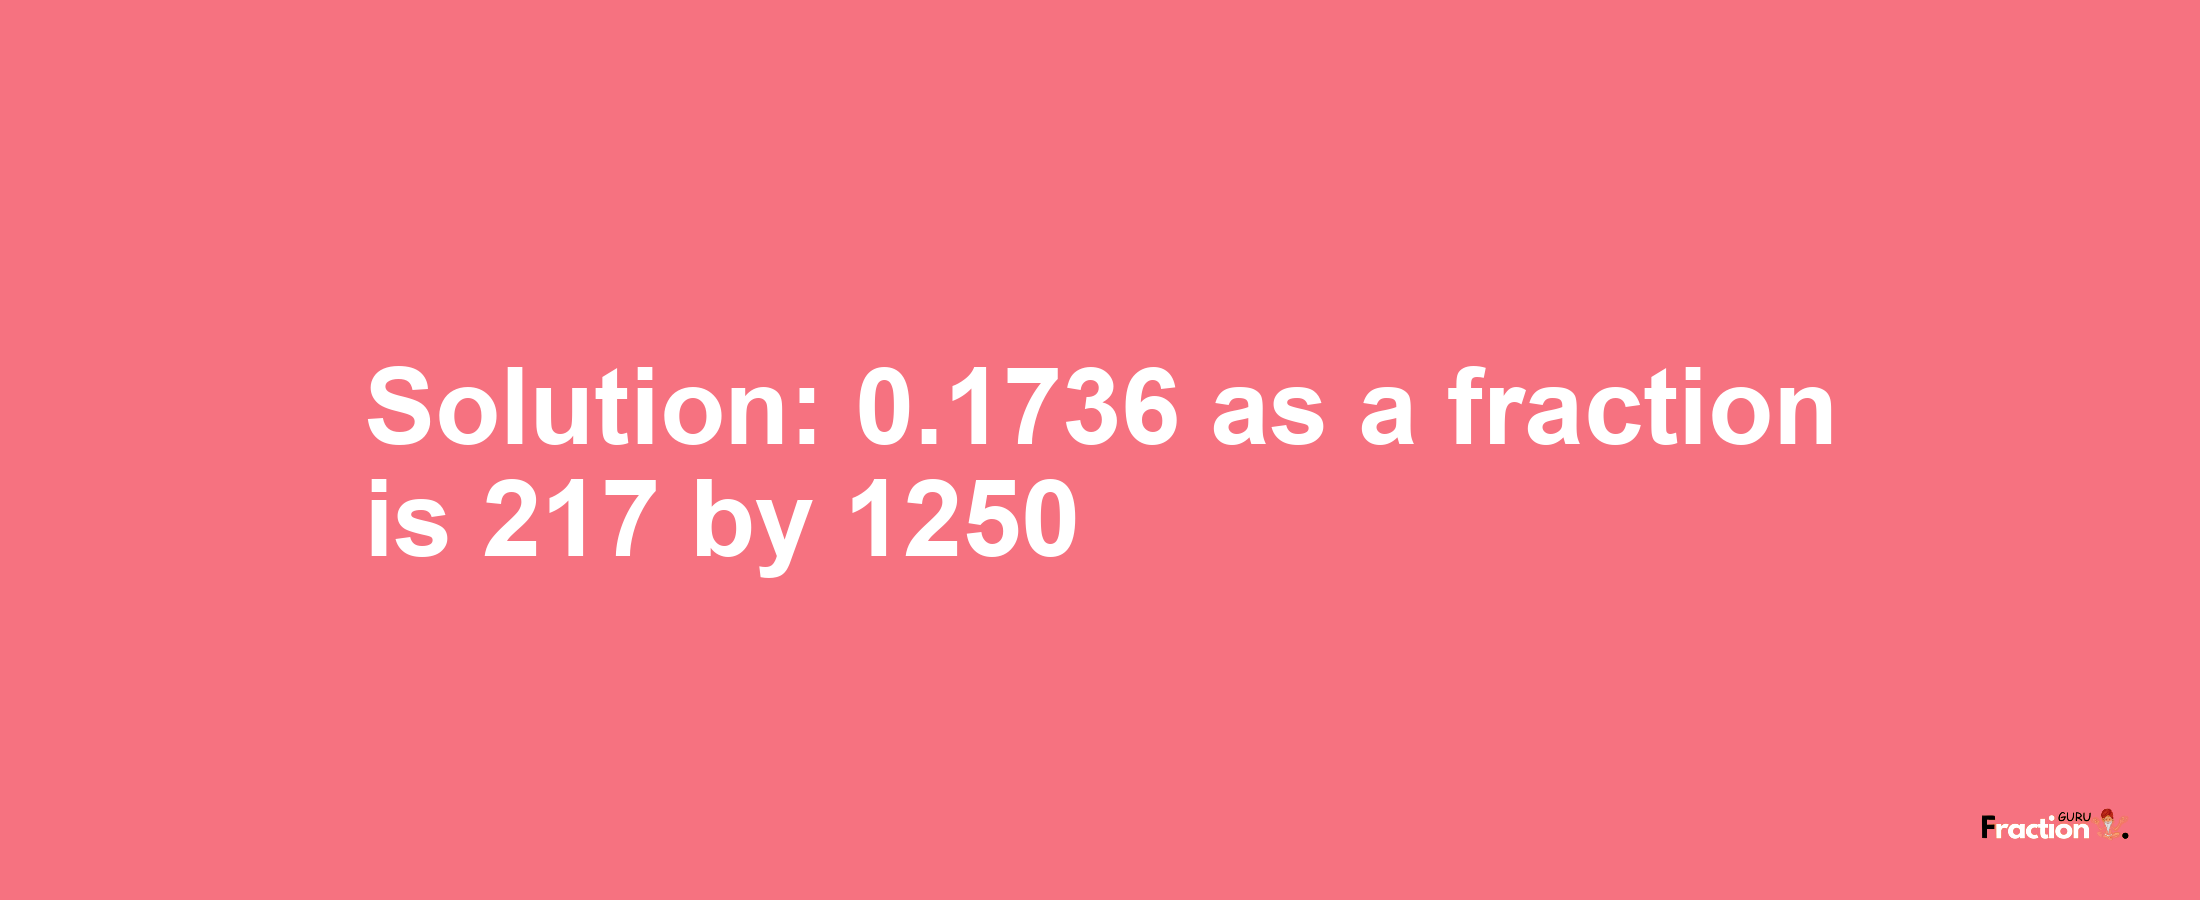 Solution:0.1736 as a fraction is 217/1250